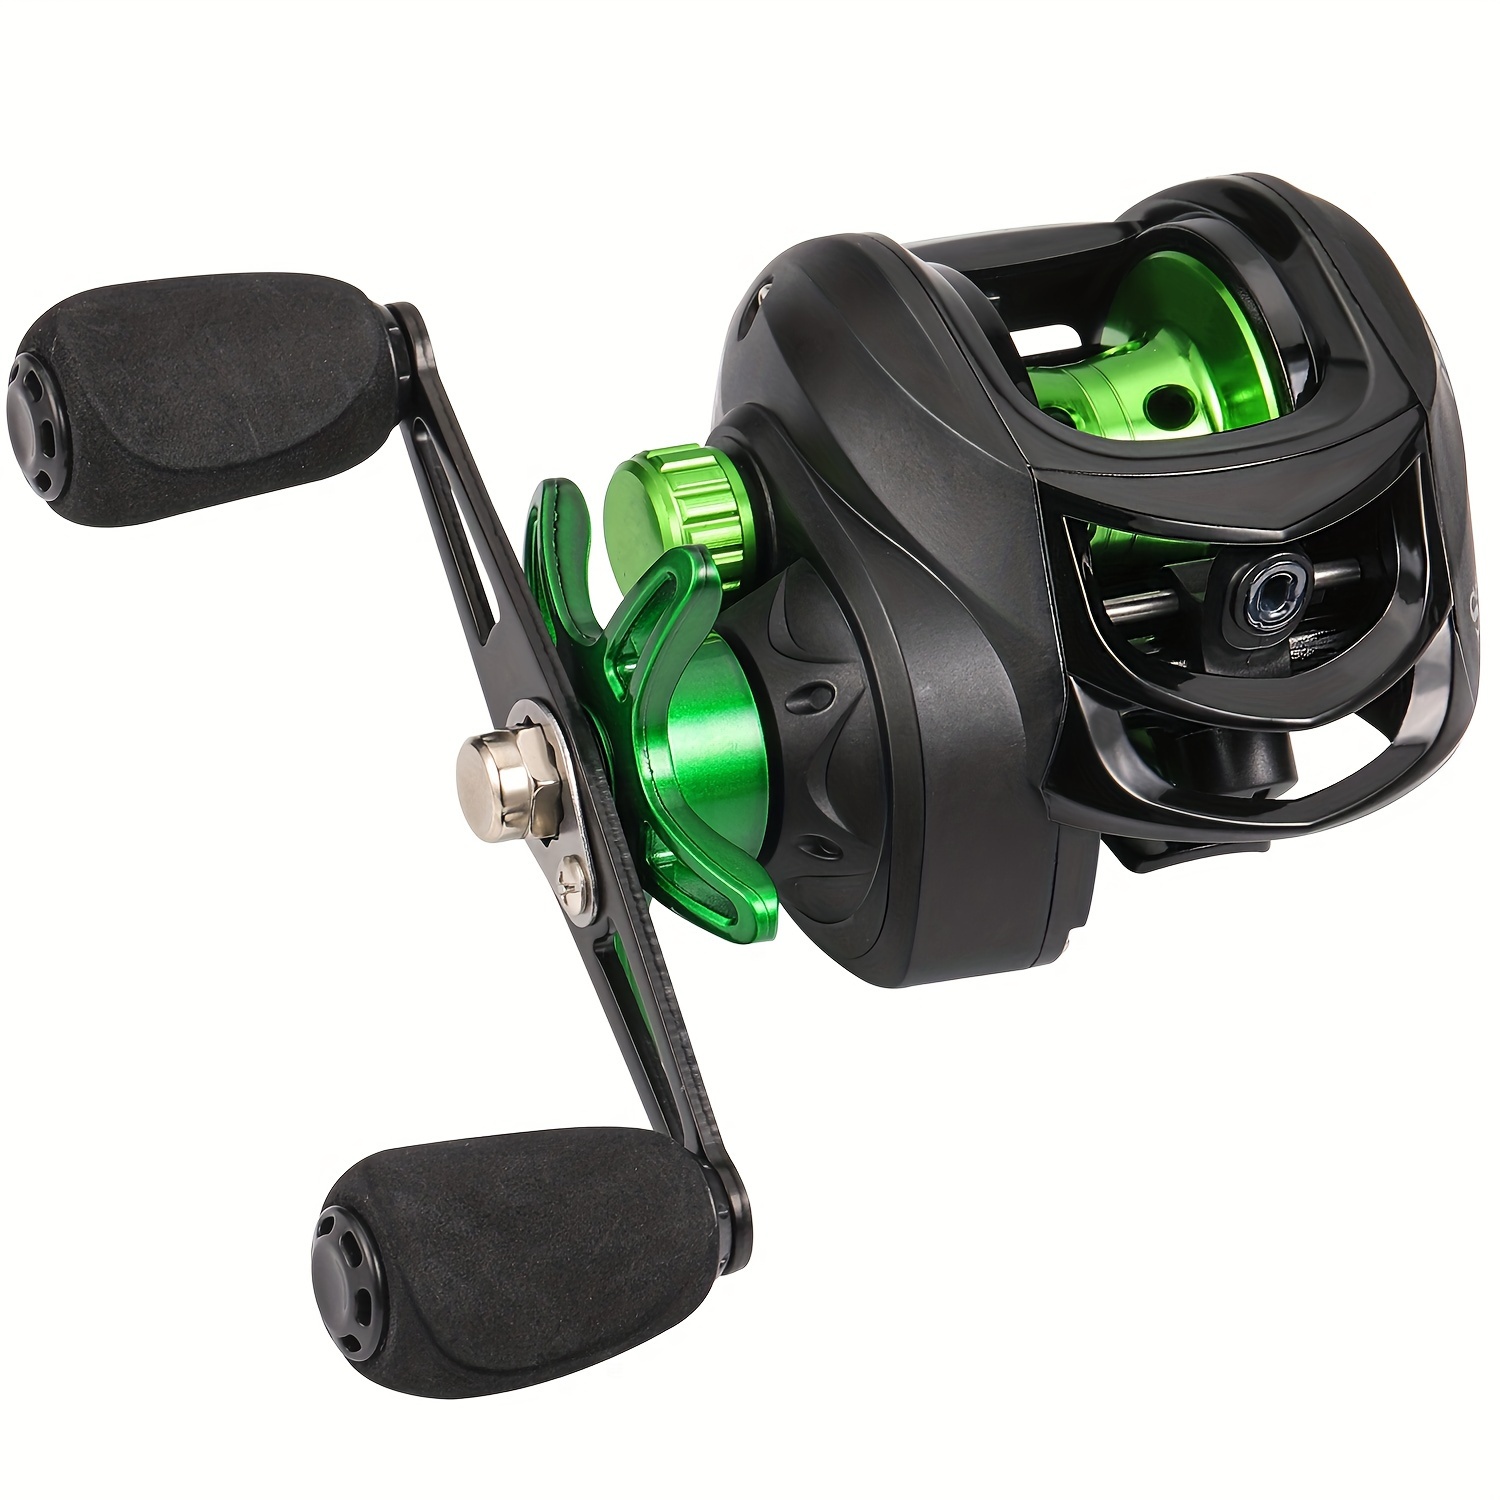 Sougayilang 1pc 7.2:1 Gear Ratio Aluminum Baitcasting Reel, Green Fishing  Reel With Magnetic Brake System For Freshwater